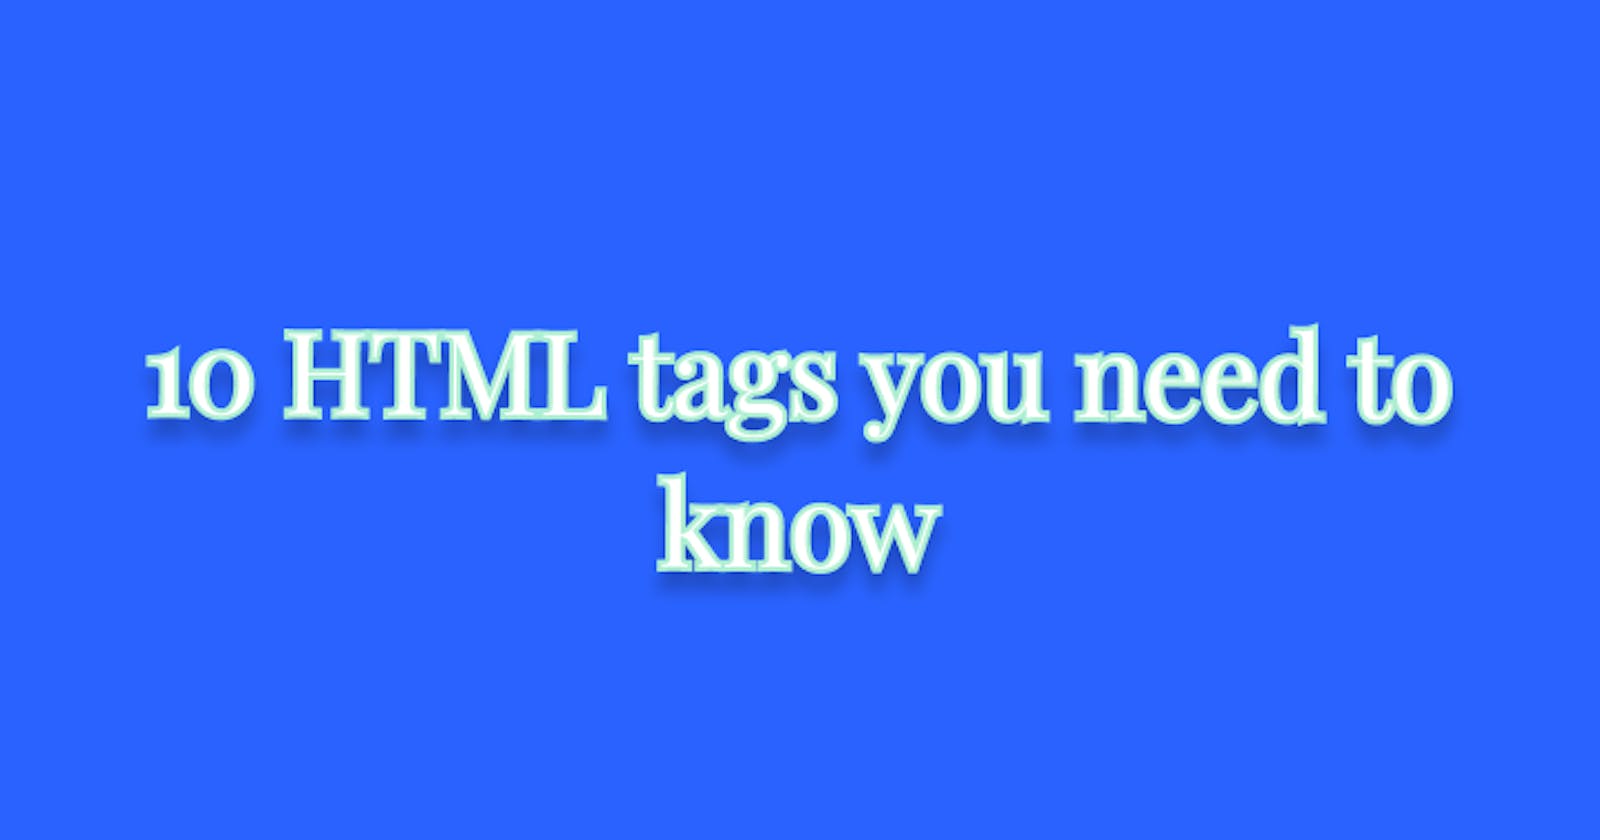 10 HTML tags you need to know